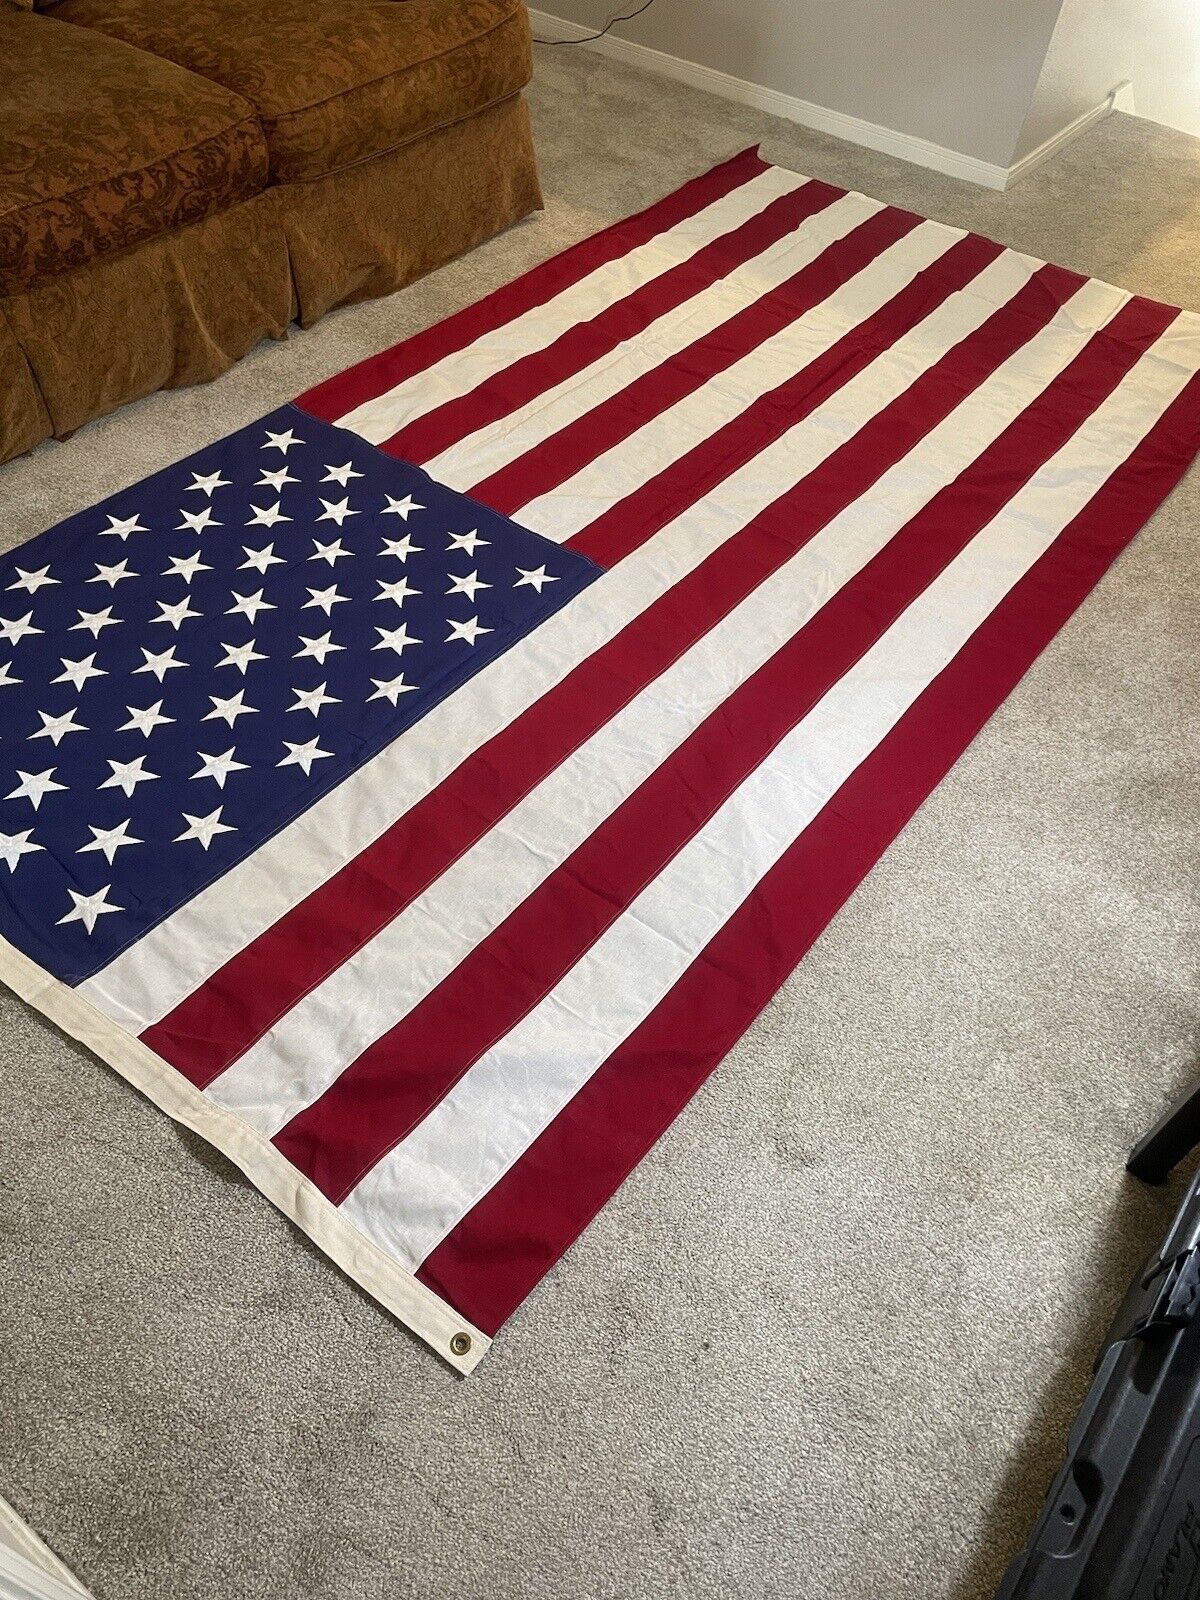 6’x10’ Ft. Vintage United States Of America Flag HEAVY DUTY - Chicago Flag Co.